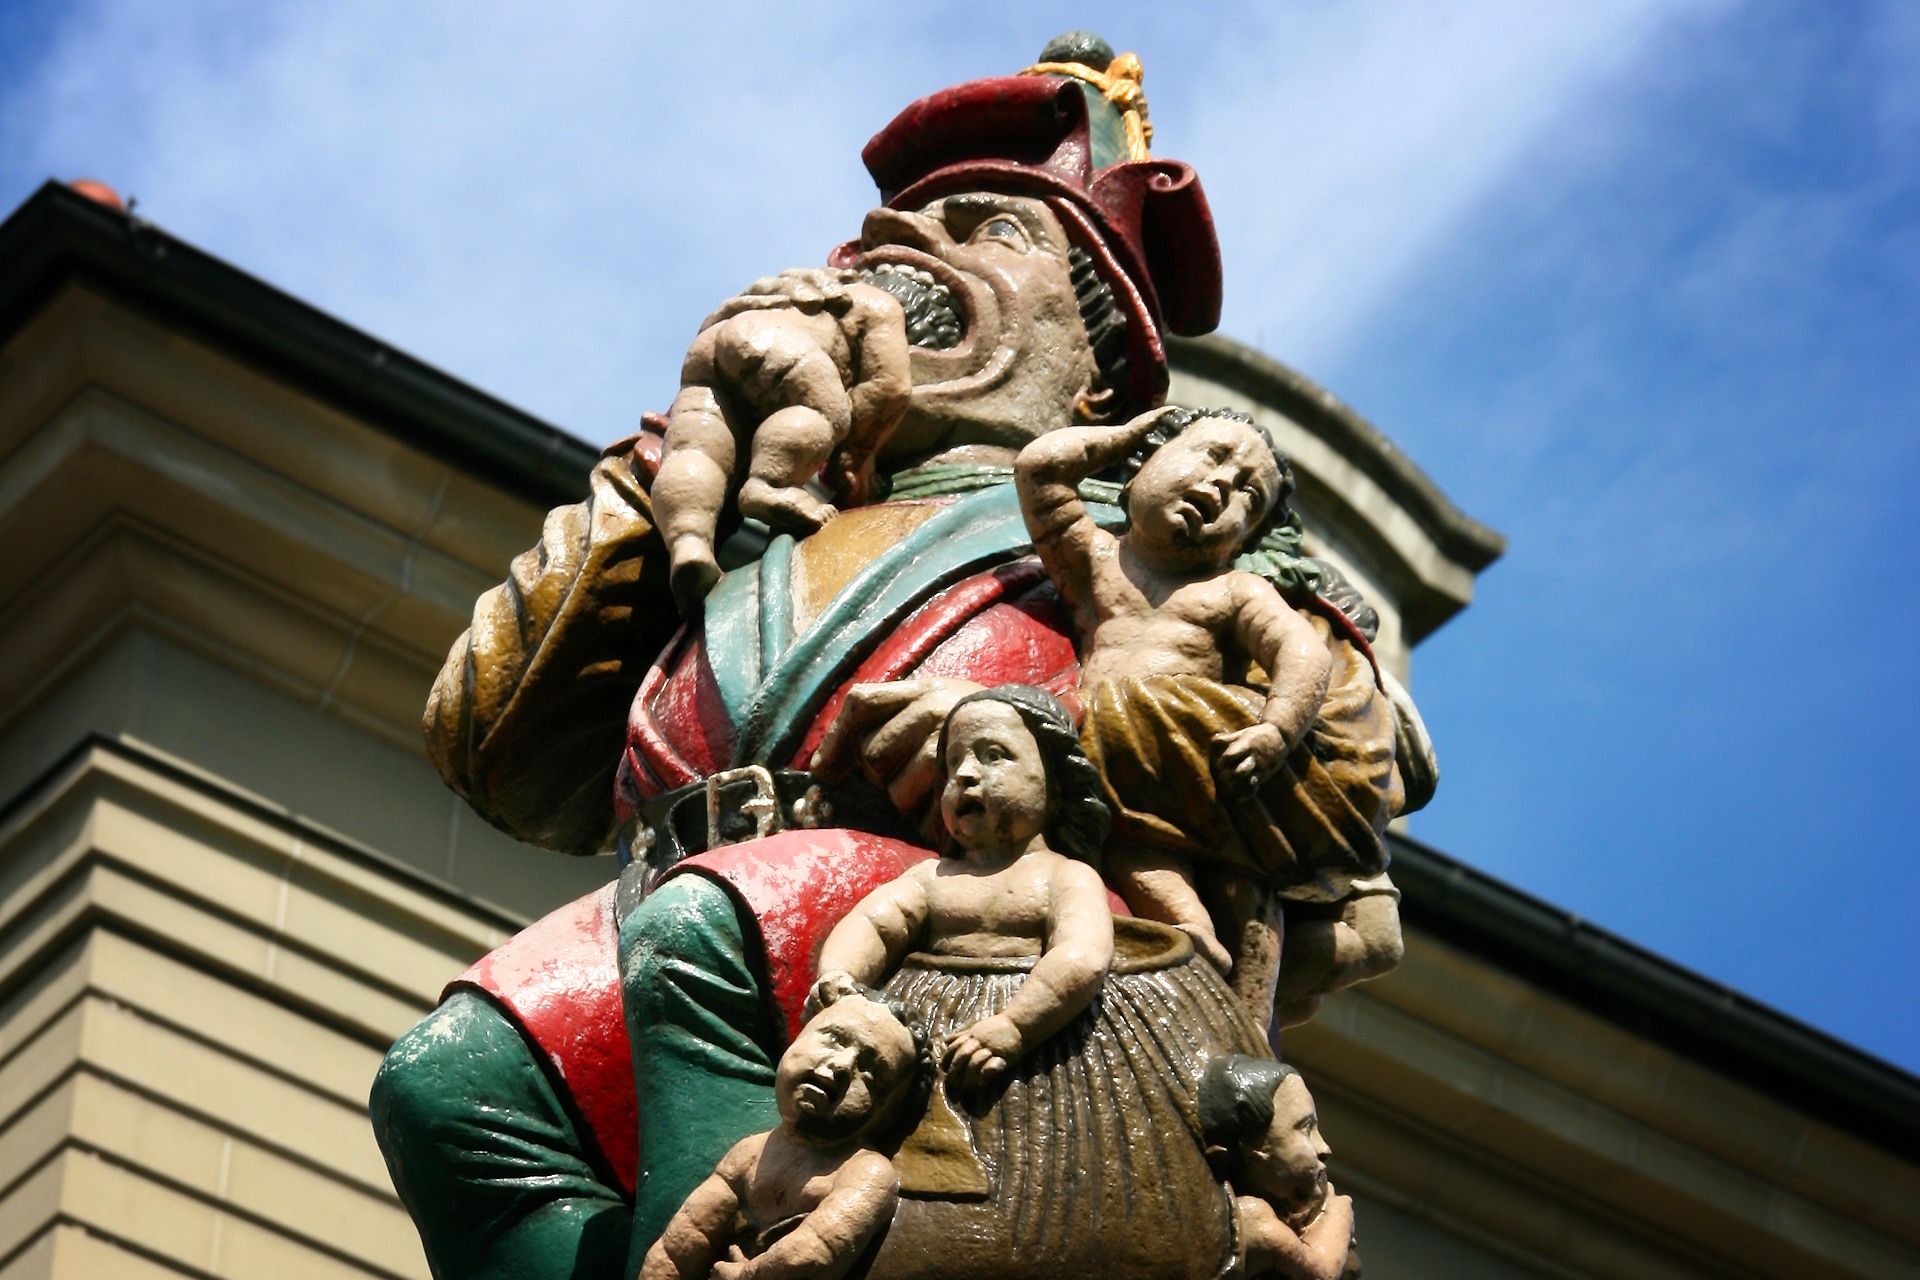 Man eating babies, a medieval sculpture in Switzerland - Fact Source